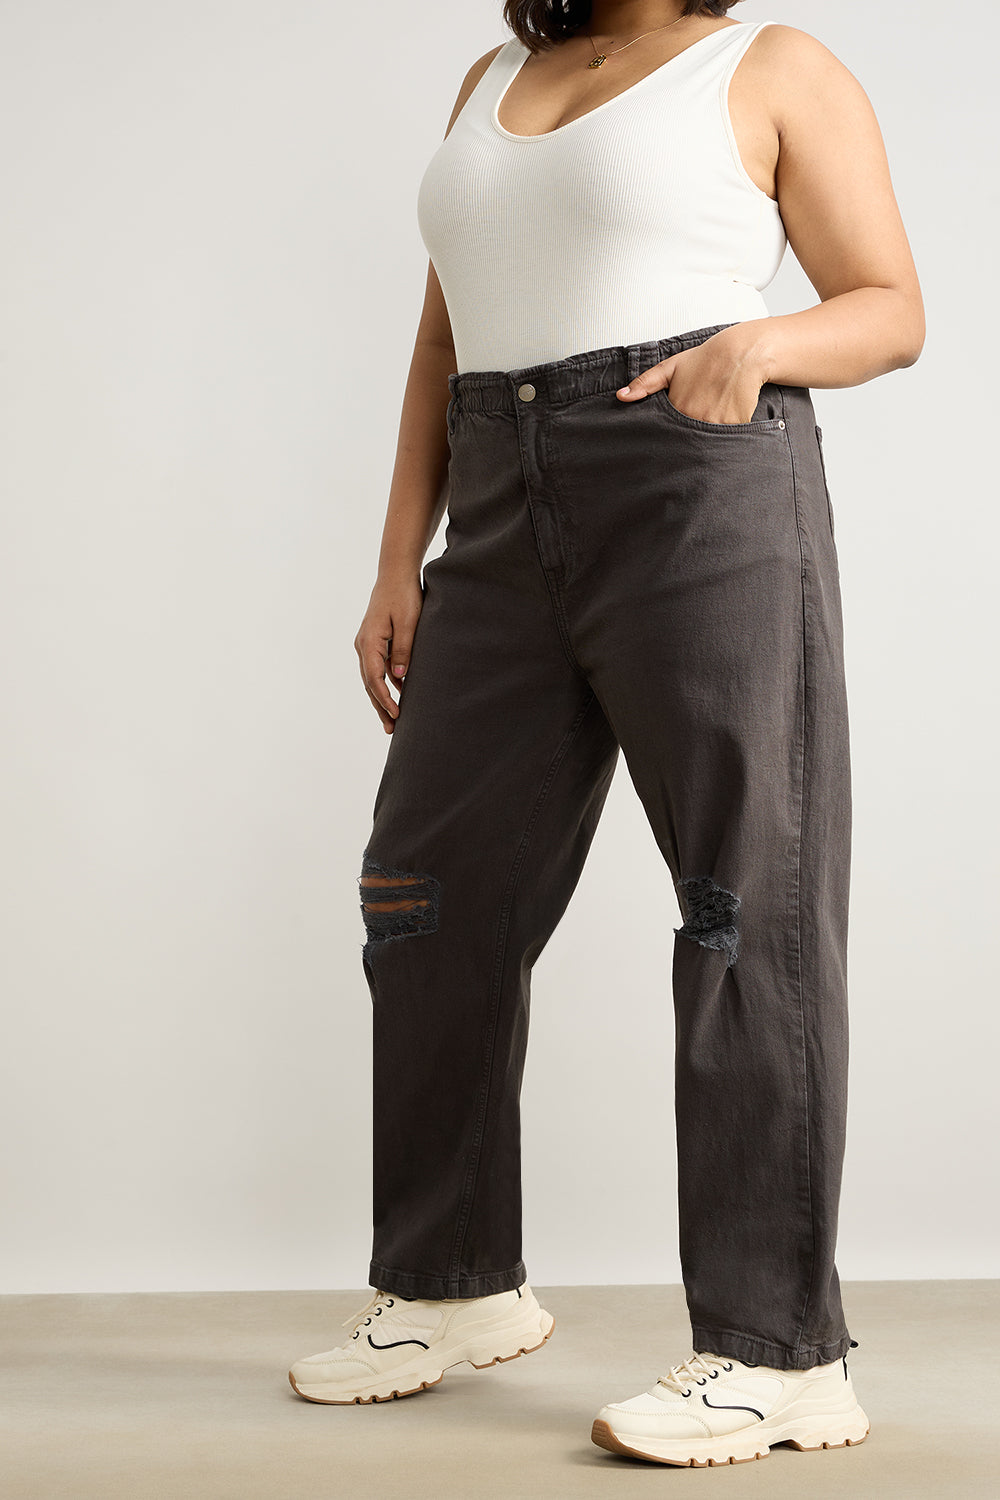 OLIVE GREEN DISTRESS MOM JEANS